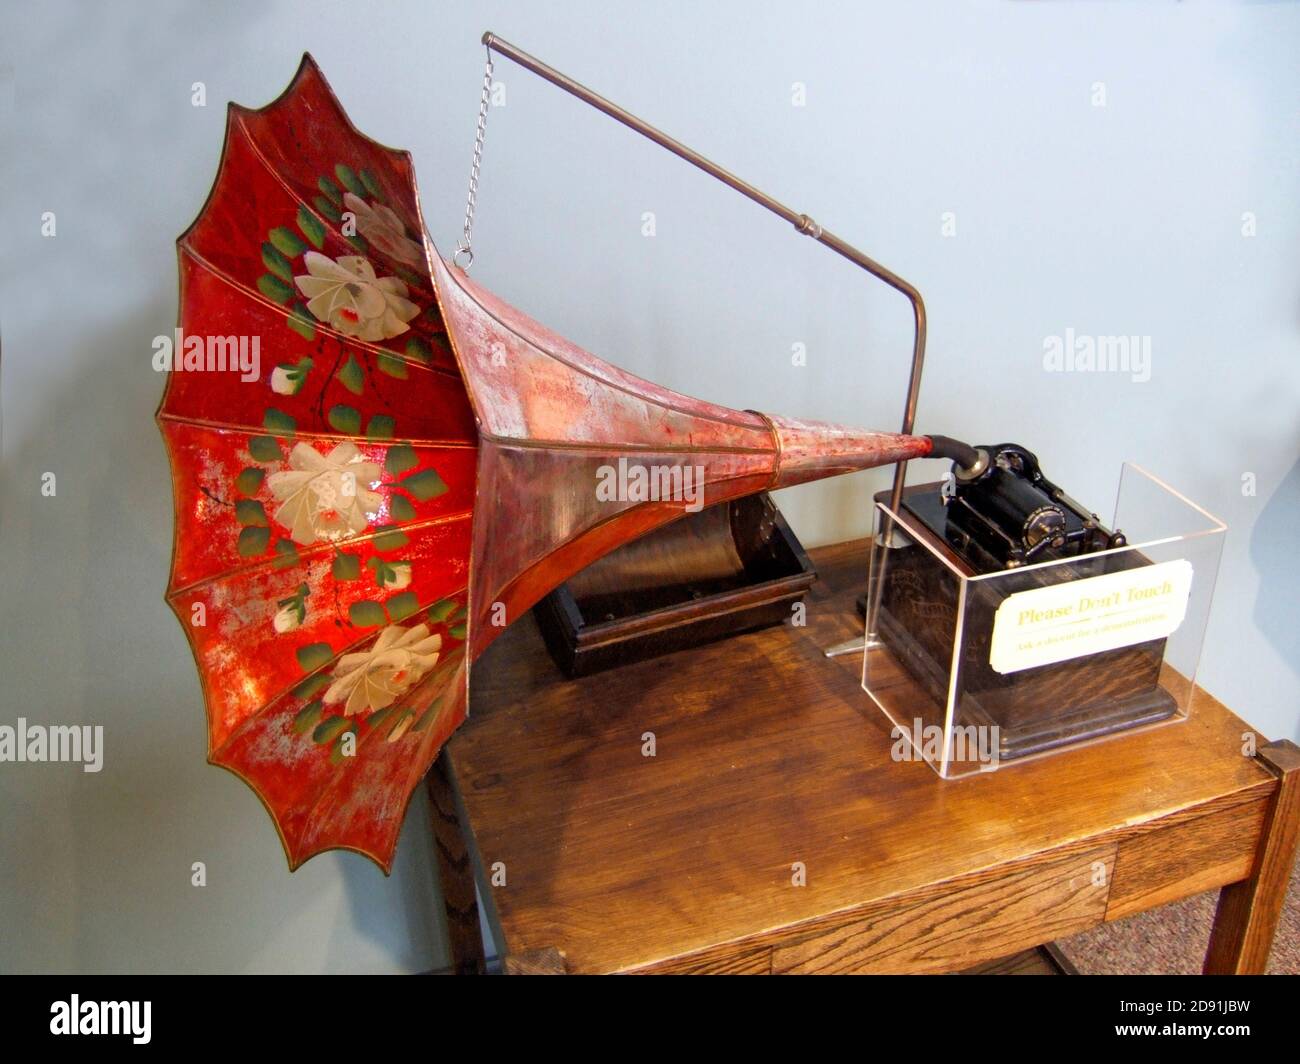 Early phonograph or record player invented by Thomas Elva Edison is on display in a museum in his boyhood town of Port Huron Michigan Stock Photo